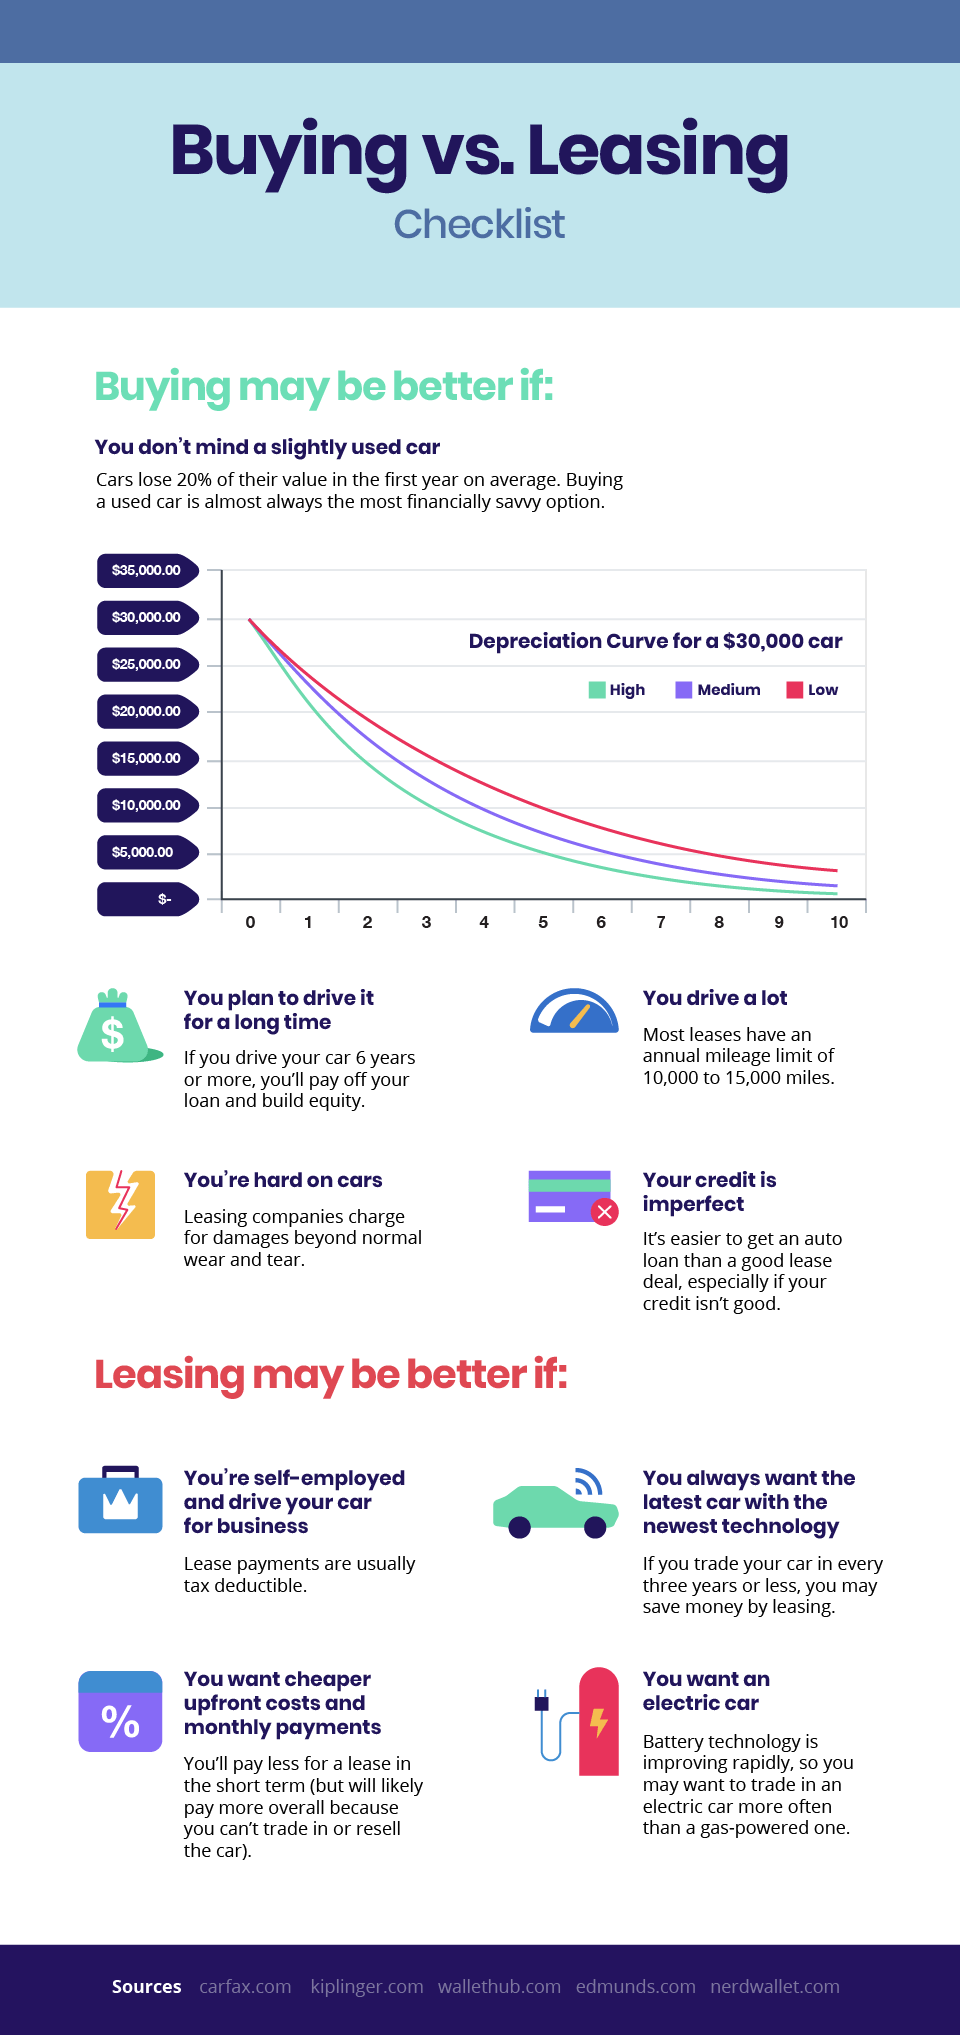 Infographic of Buying vs. Leasing Checklist.